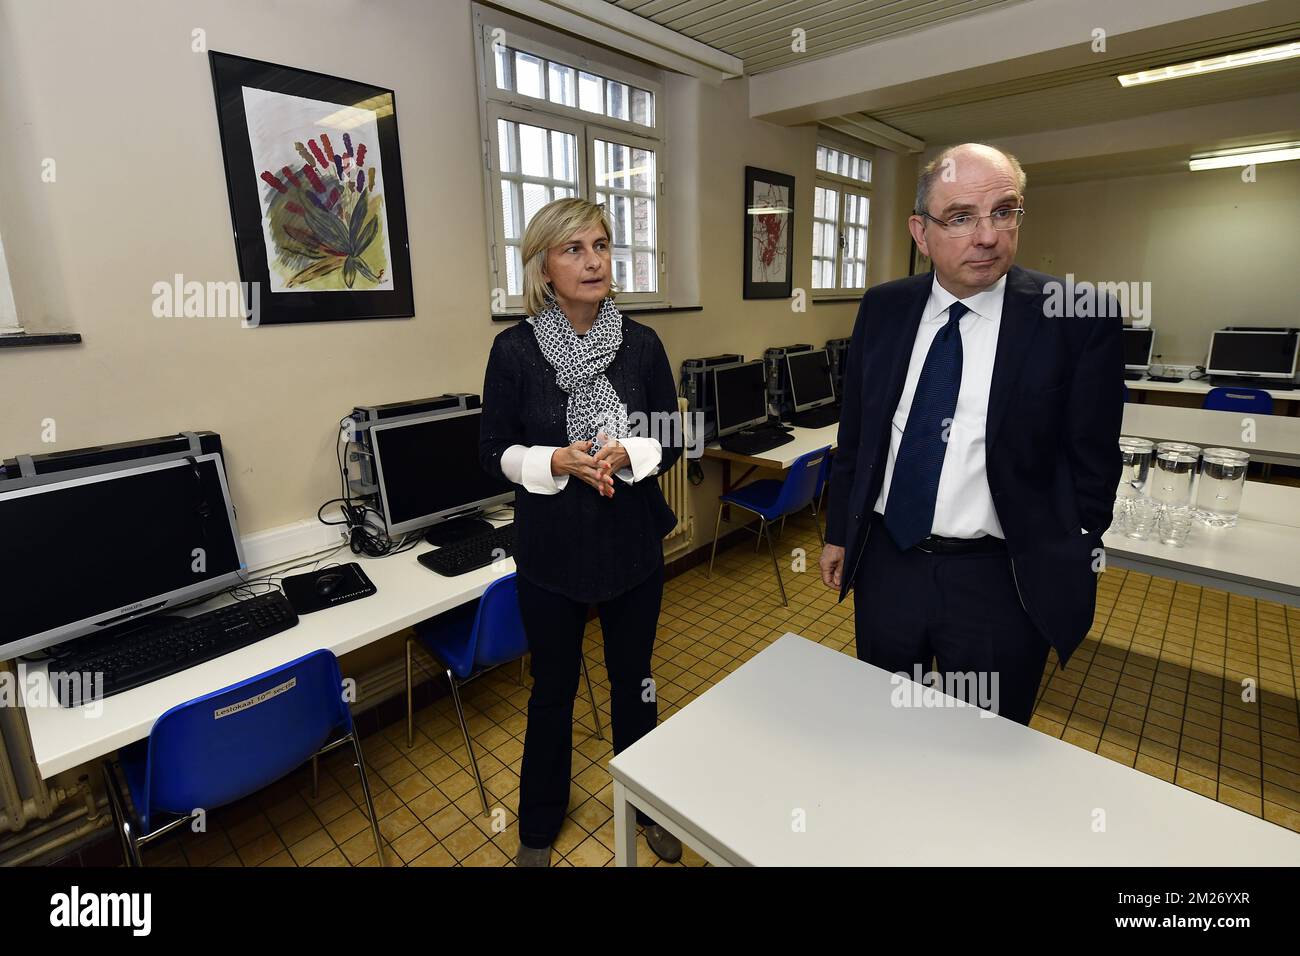 Flemish Minister of Education Hilde Crevits and Minister of Justice Koen Geens pictured during a visit to the Antwerp prison, Monday 08 May 2017. BELGA PHOTO ERIC LALMAND  Stock Photo